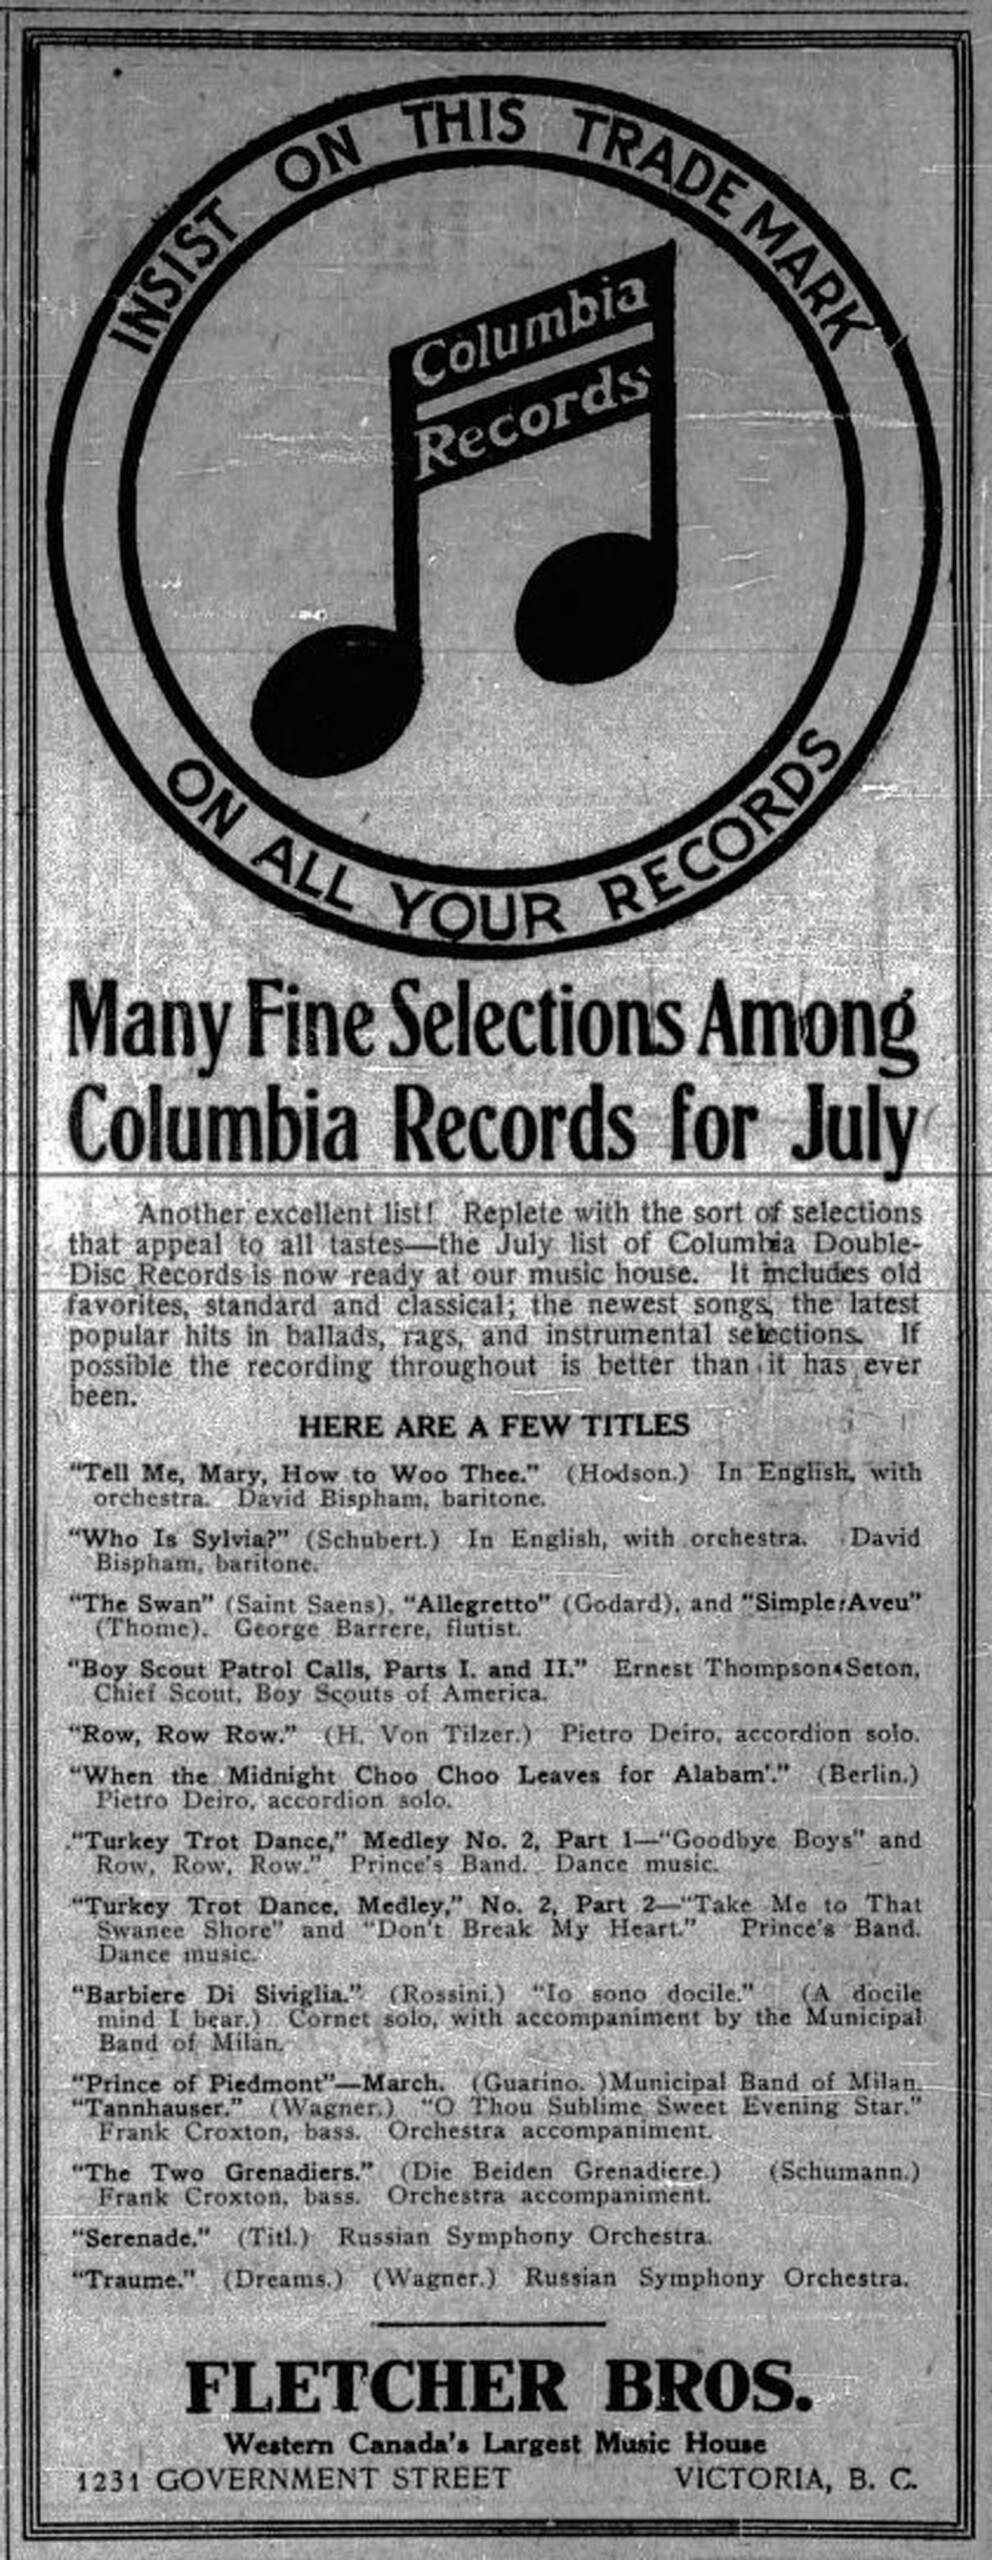 June 1913 advertisement for Columbia Records by Fletcher Brothers, 1231 Government Street.